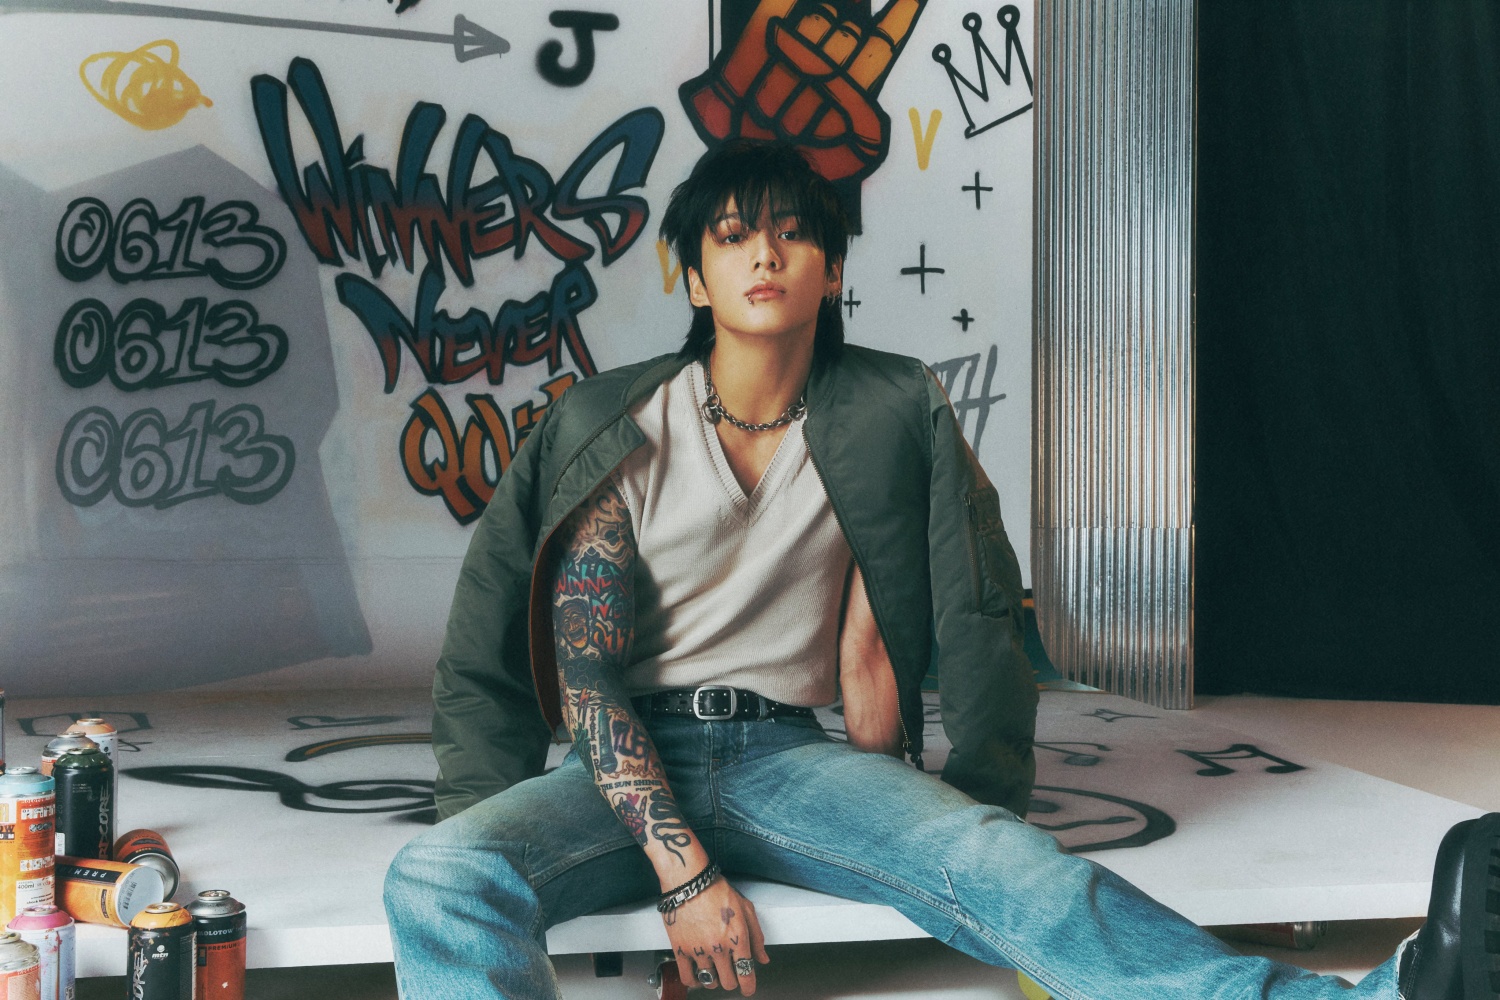 Jungkook unveils track poster for solo album title song ‘Standing Next to You’